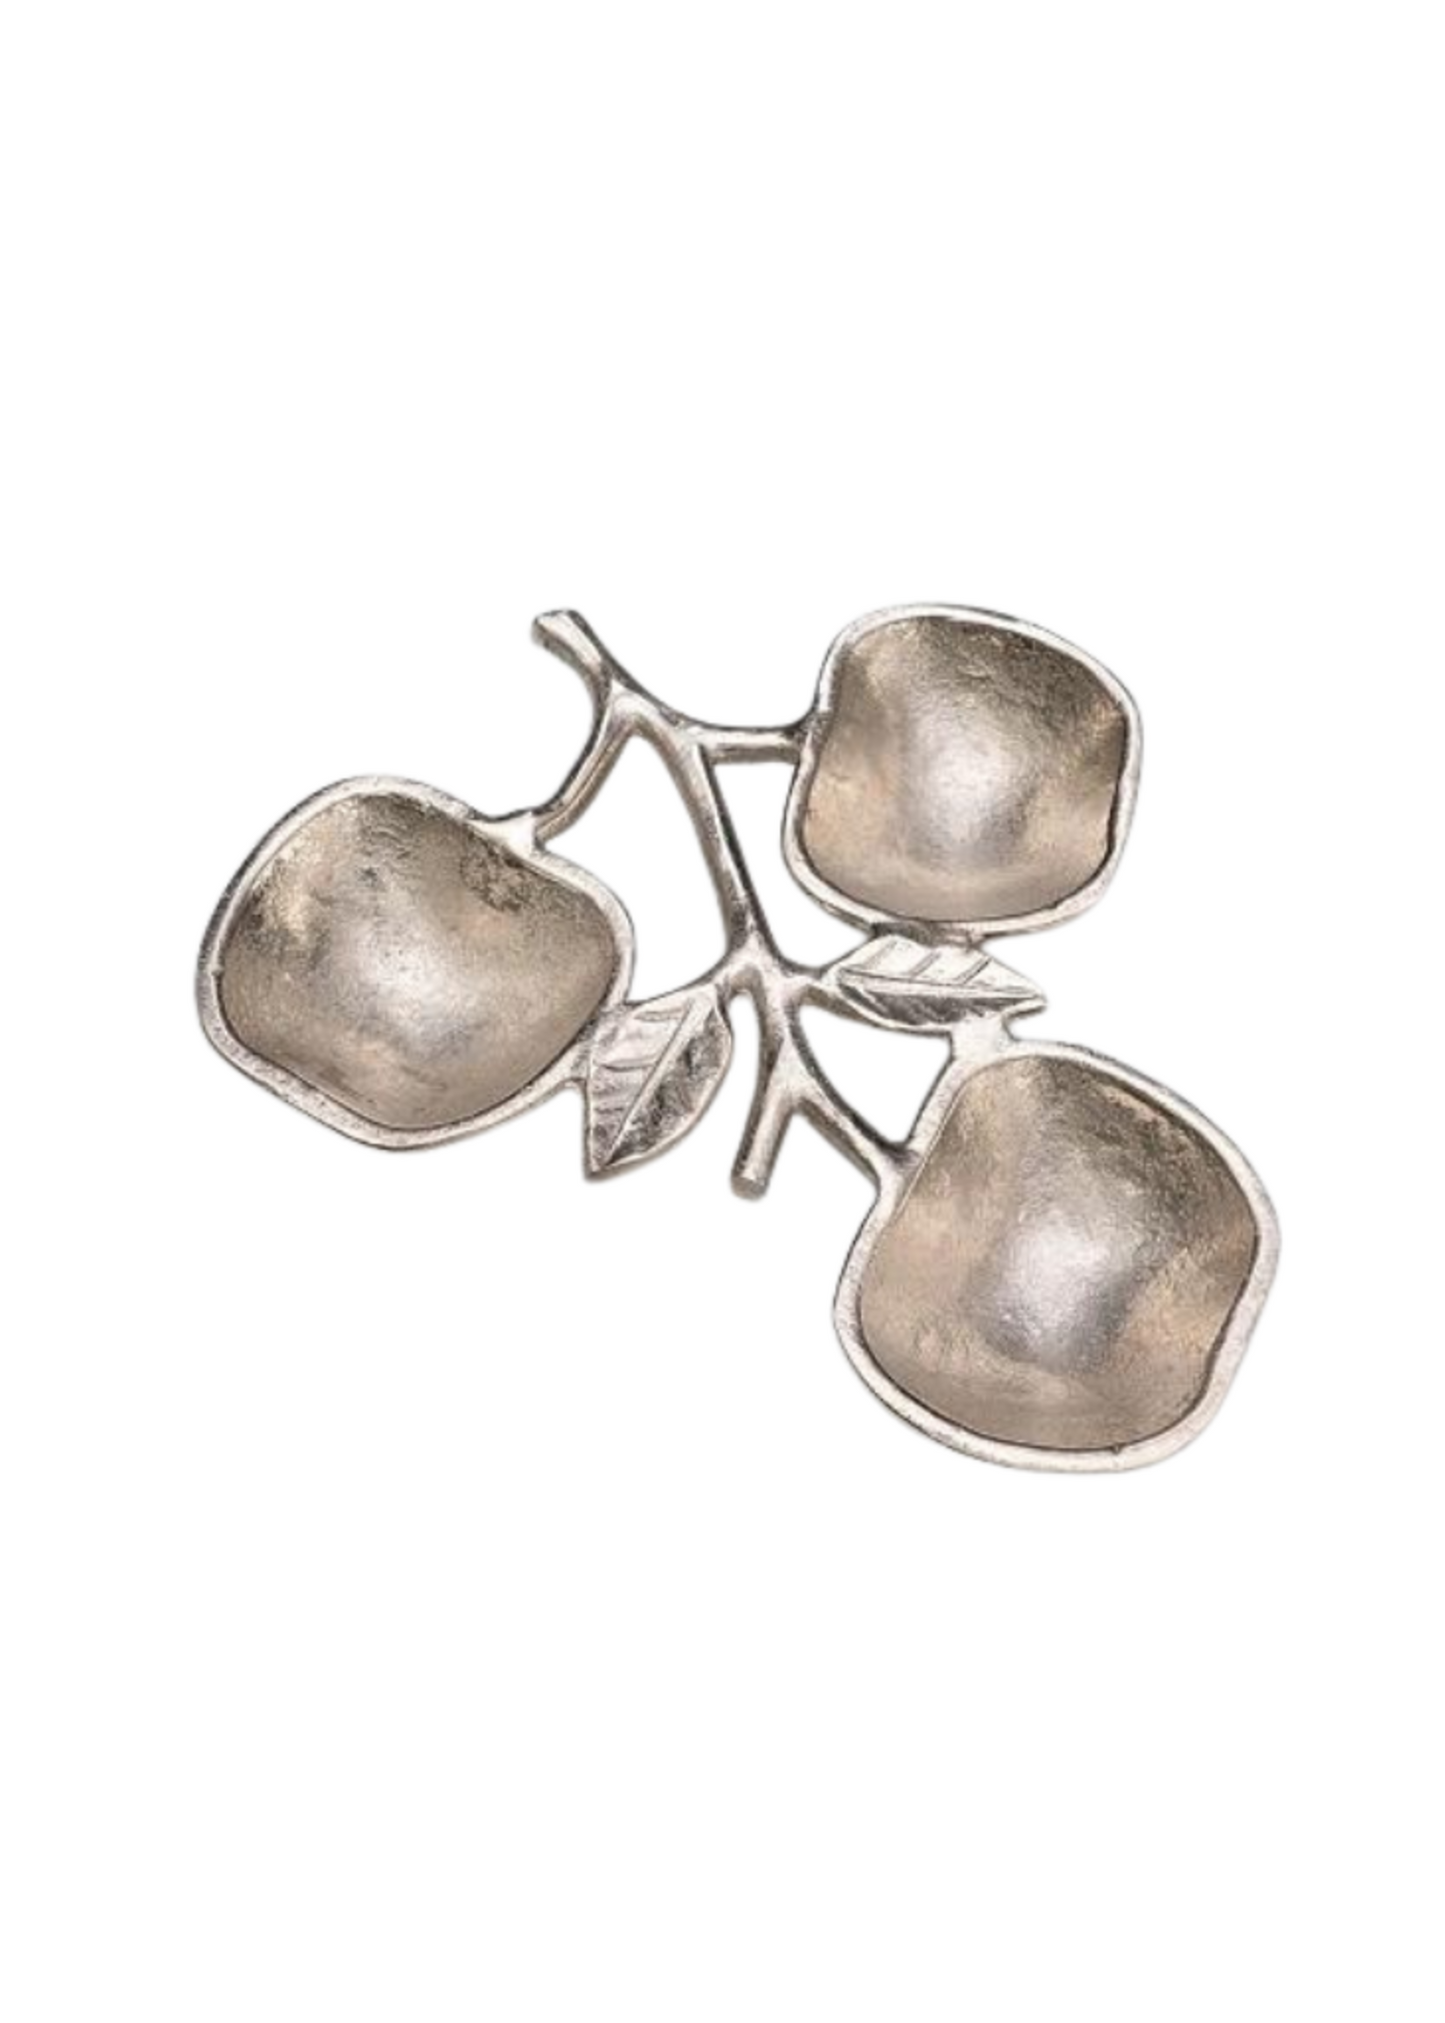 3 Section Silver Apple Server